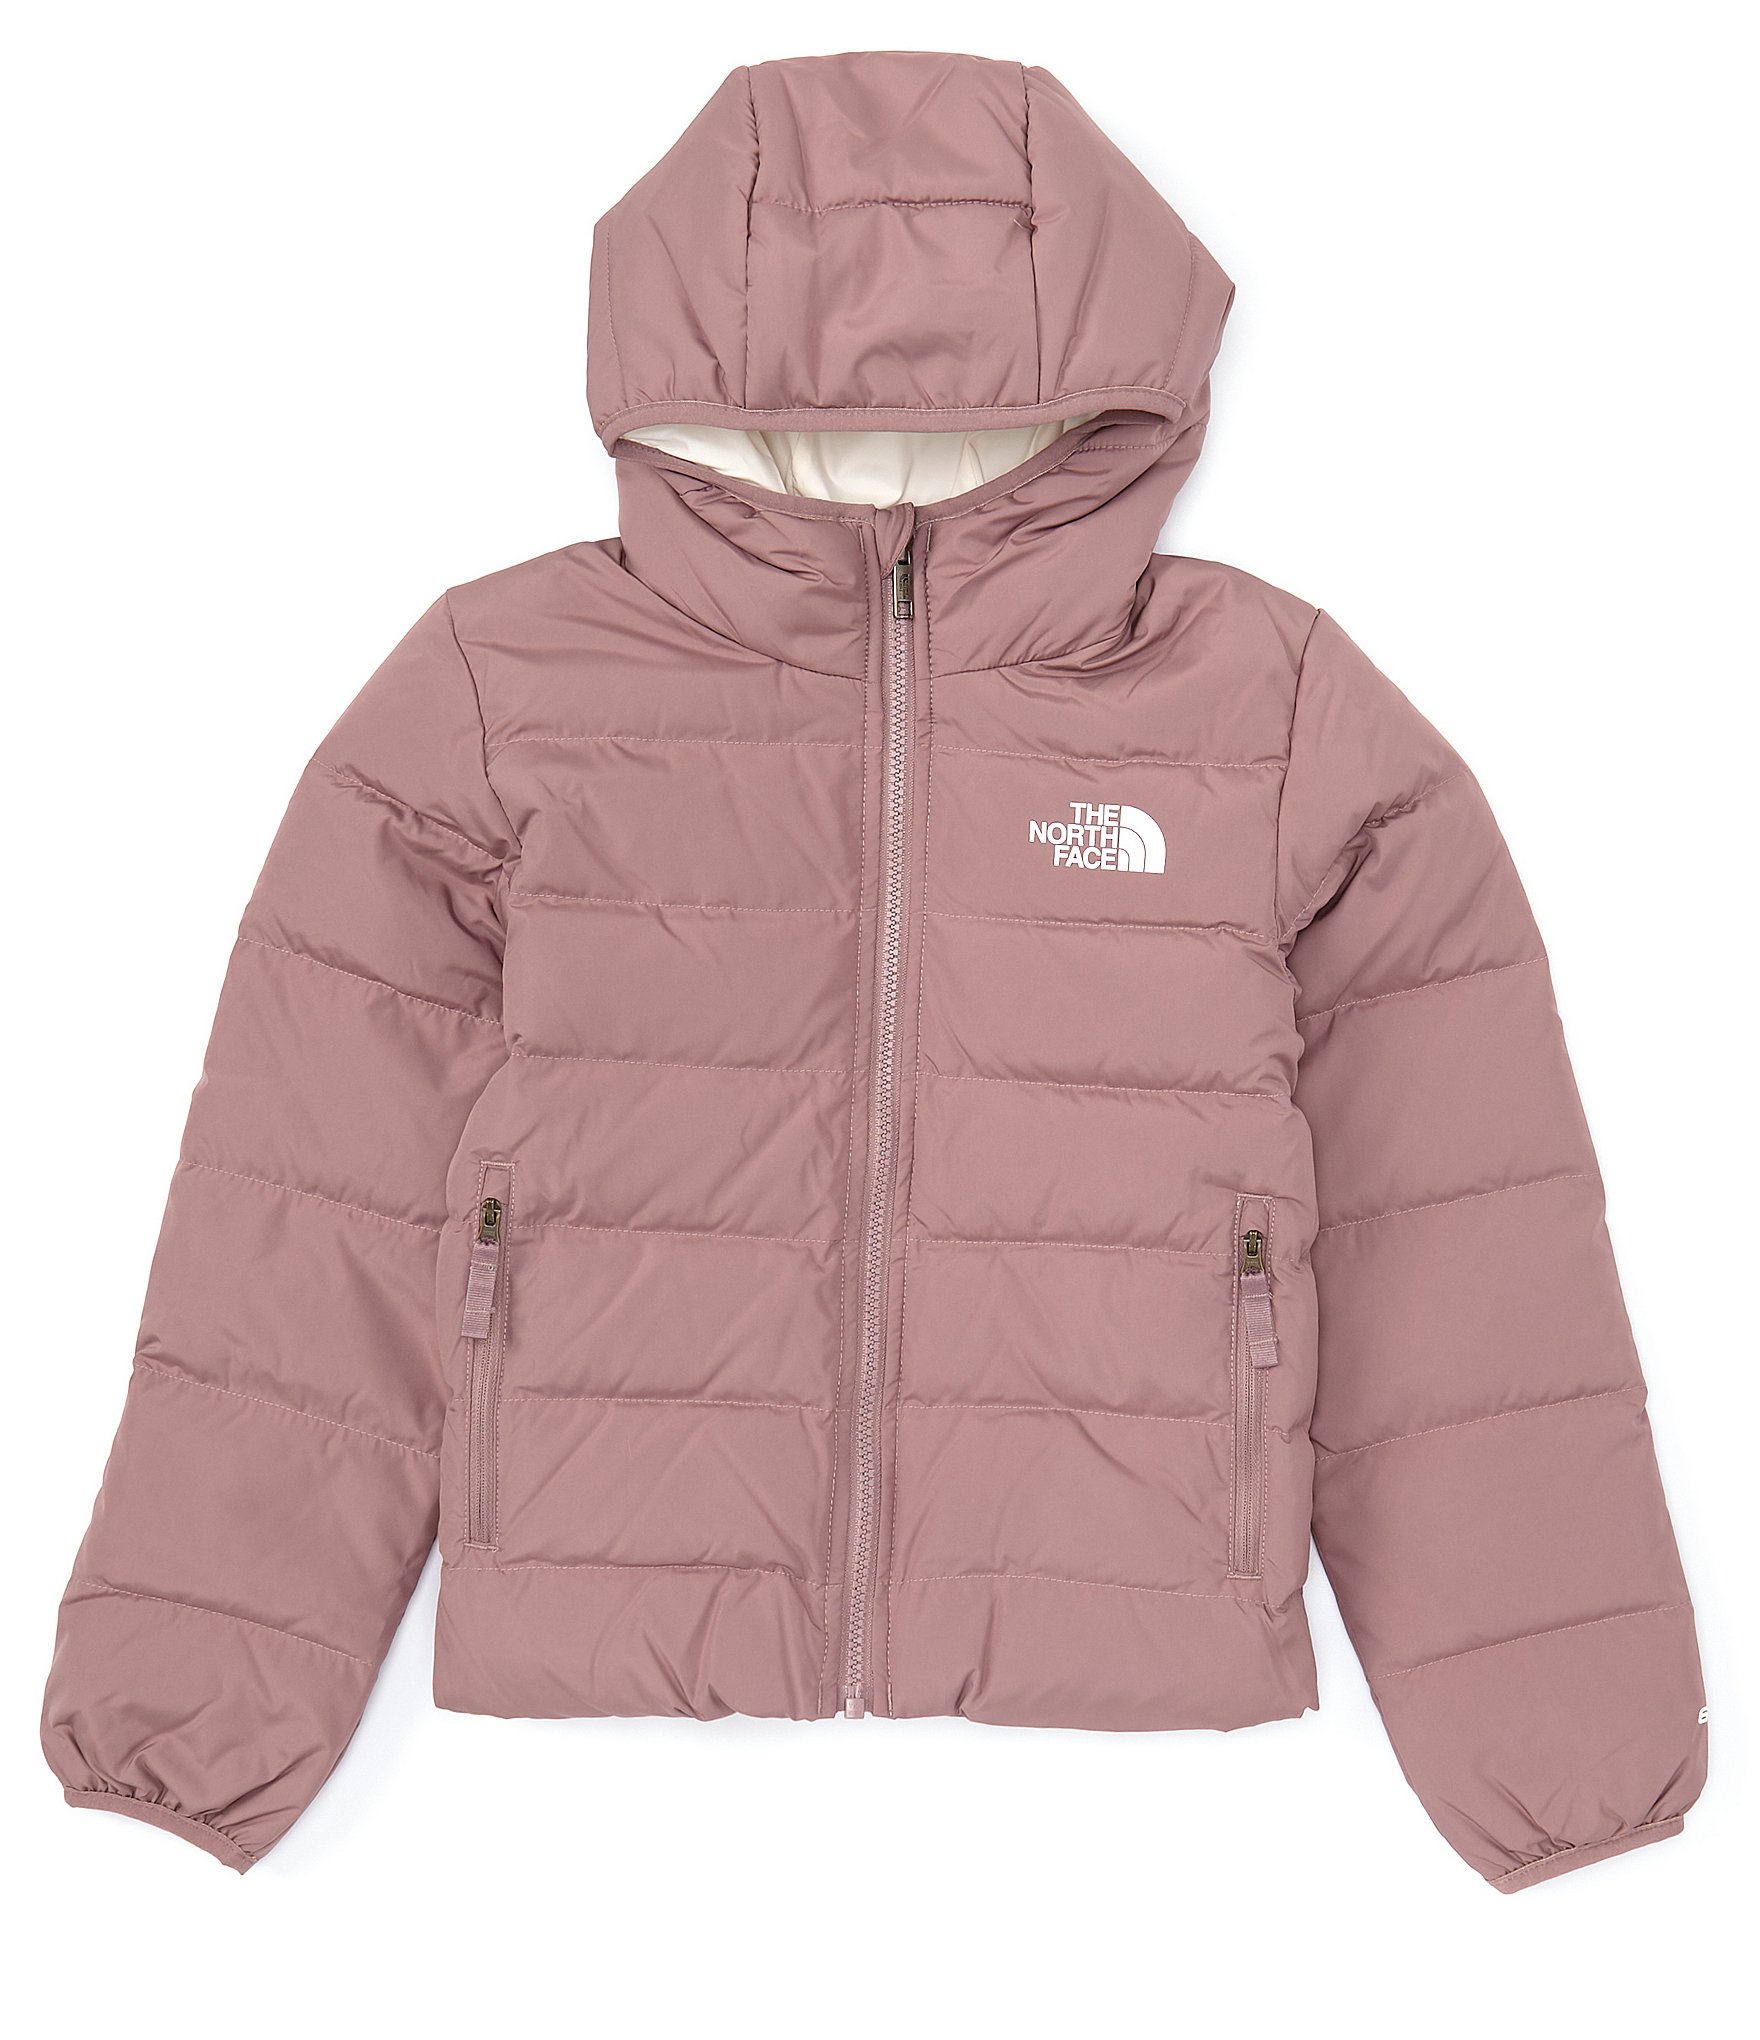 Amazon.com: THE NORTH FACE Girls' Hyalite Down Jacket, Sweet  Violet/Iridescent, Large: Clothing, Shoes & Jewelry